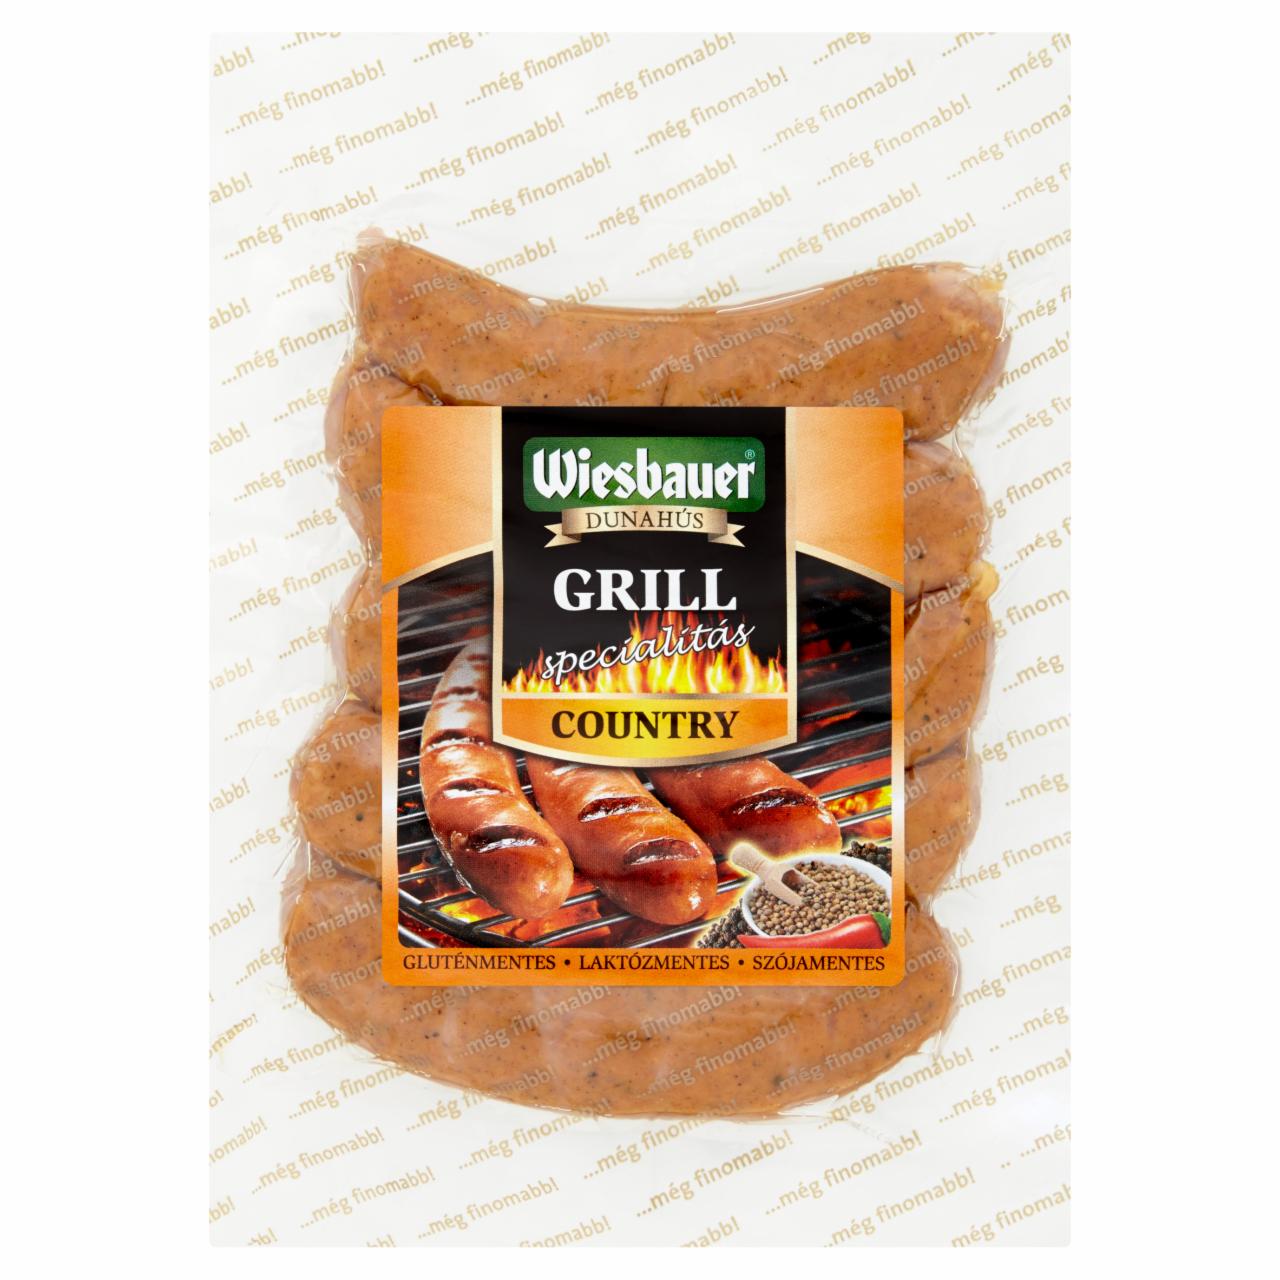 Képek - Wiesbauer country grill specialitás 300 g